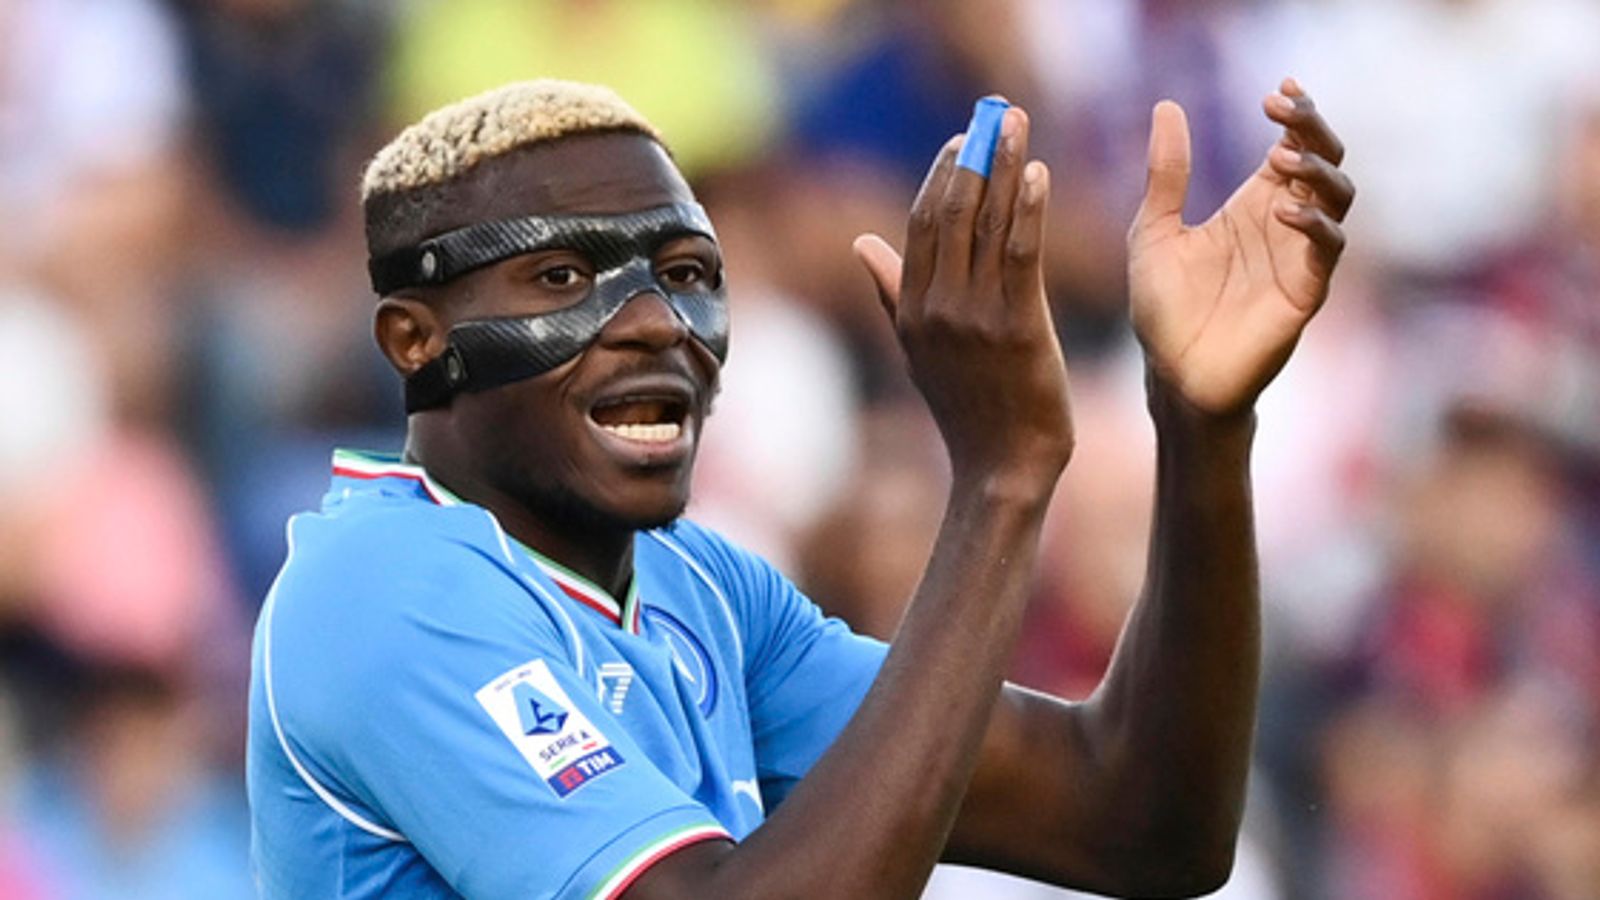 Victor Osimhen: Napoli insist they 'never intended to make fun' of own striker in TikTok video